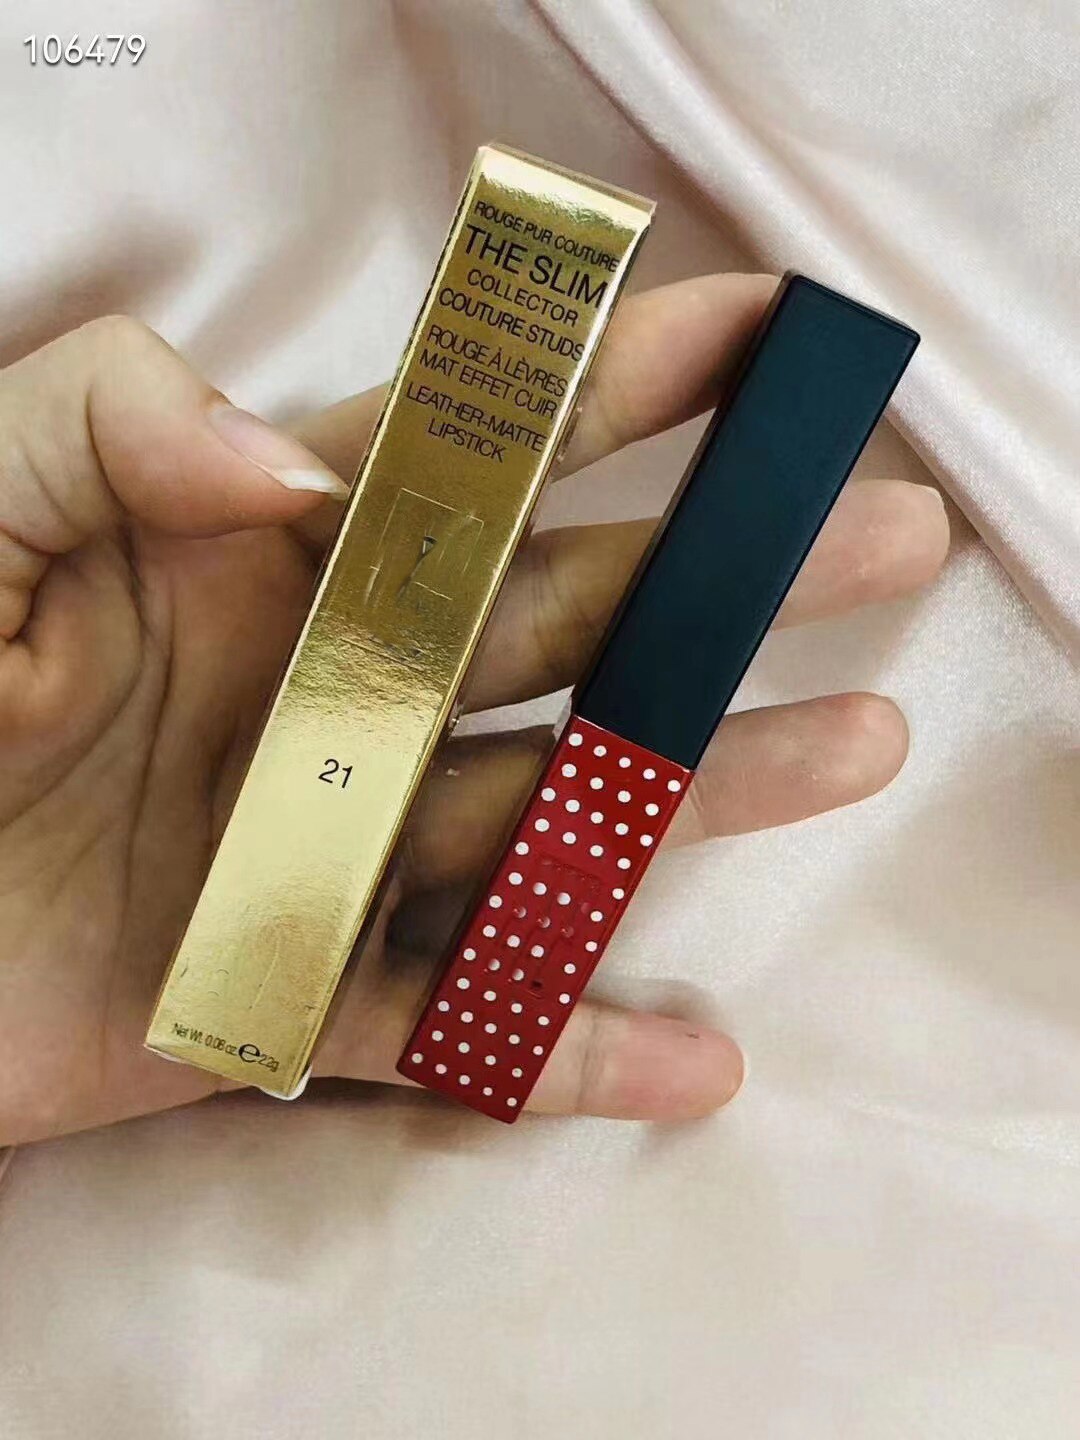 Brand New 2022 Lip Cosmetics The Slim Rouge A Levres Highly Pigmented  Velvet Matte Lipstick Color 21-28-301-302-303-304-305-306